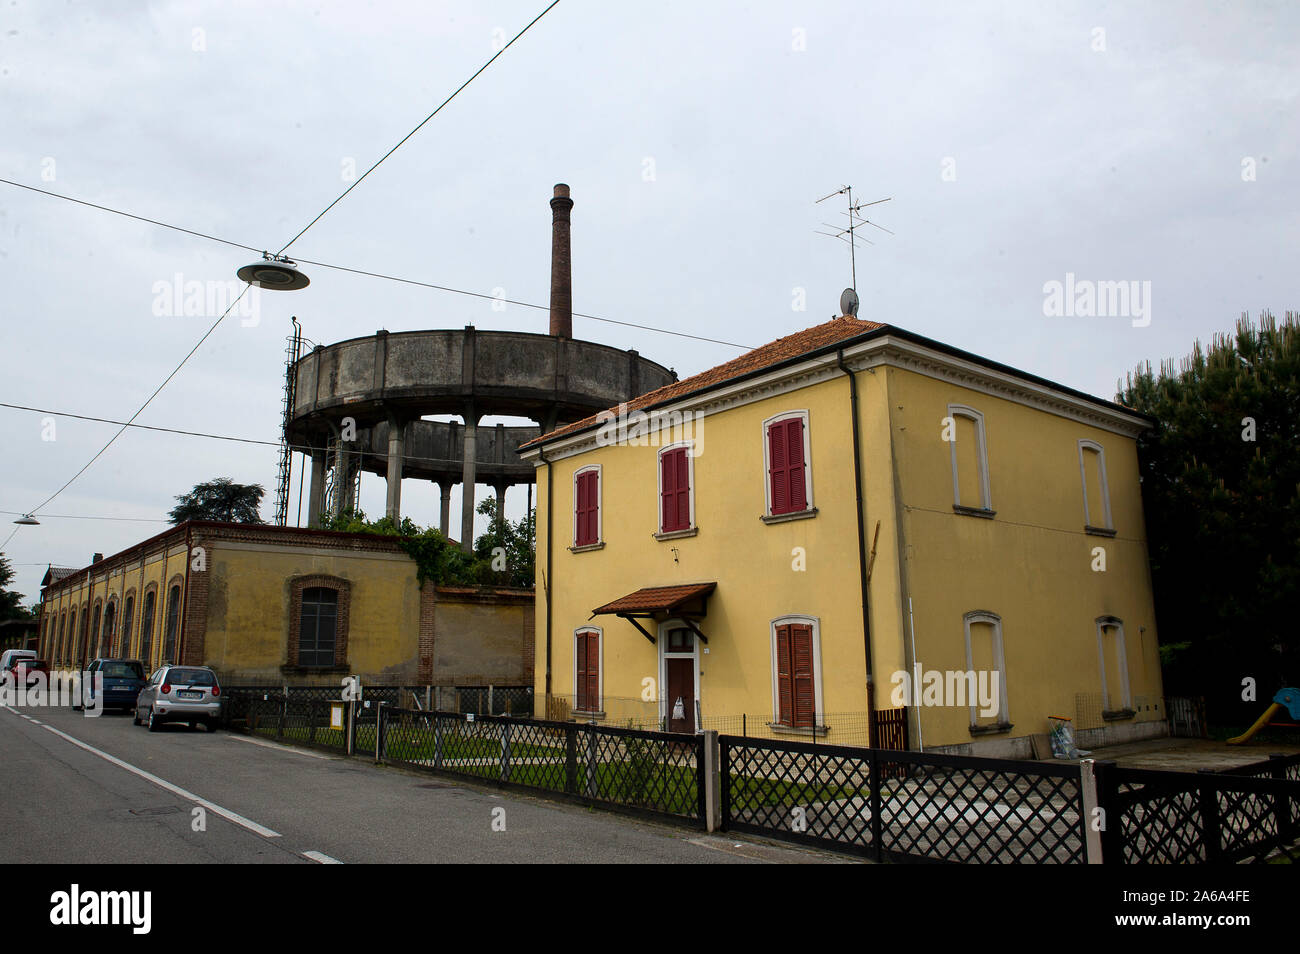 Europe, Italy, Lombardy, Crespi d'Adda workers' village, Unesco heritage, aqueduct tower Stock Photo